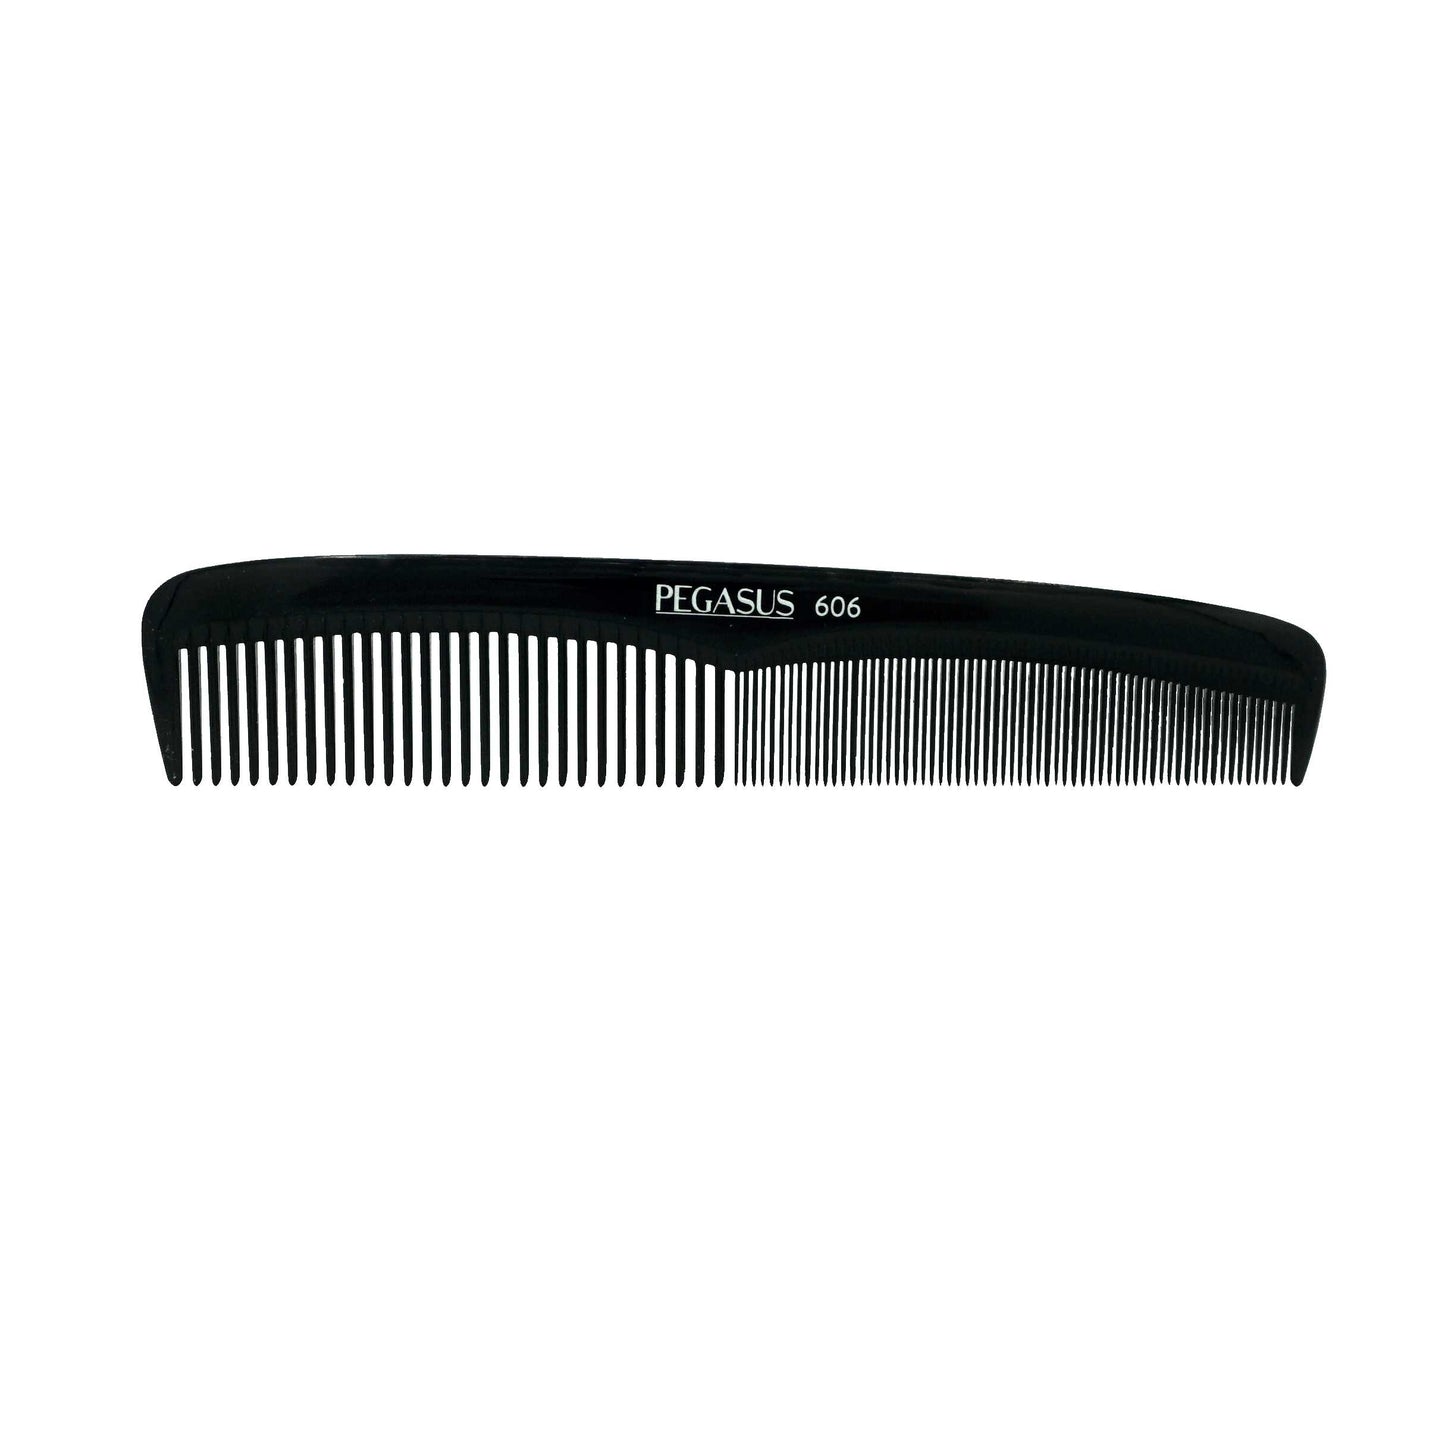 Pegasus 606, 7in Styling Comb with Inch Marks, Handmade, Seamless, Smooth Edges, Anti Static, Heat and Chemically Resistant, Portable Pocket Purse Dresser Comb | Peines de goma dura - Black